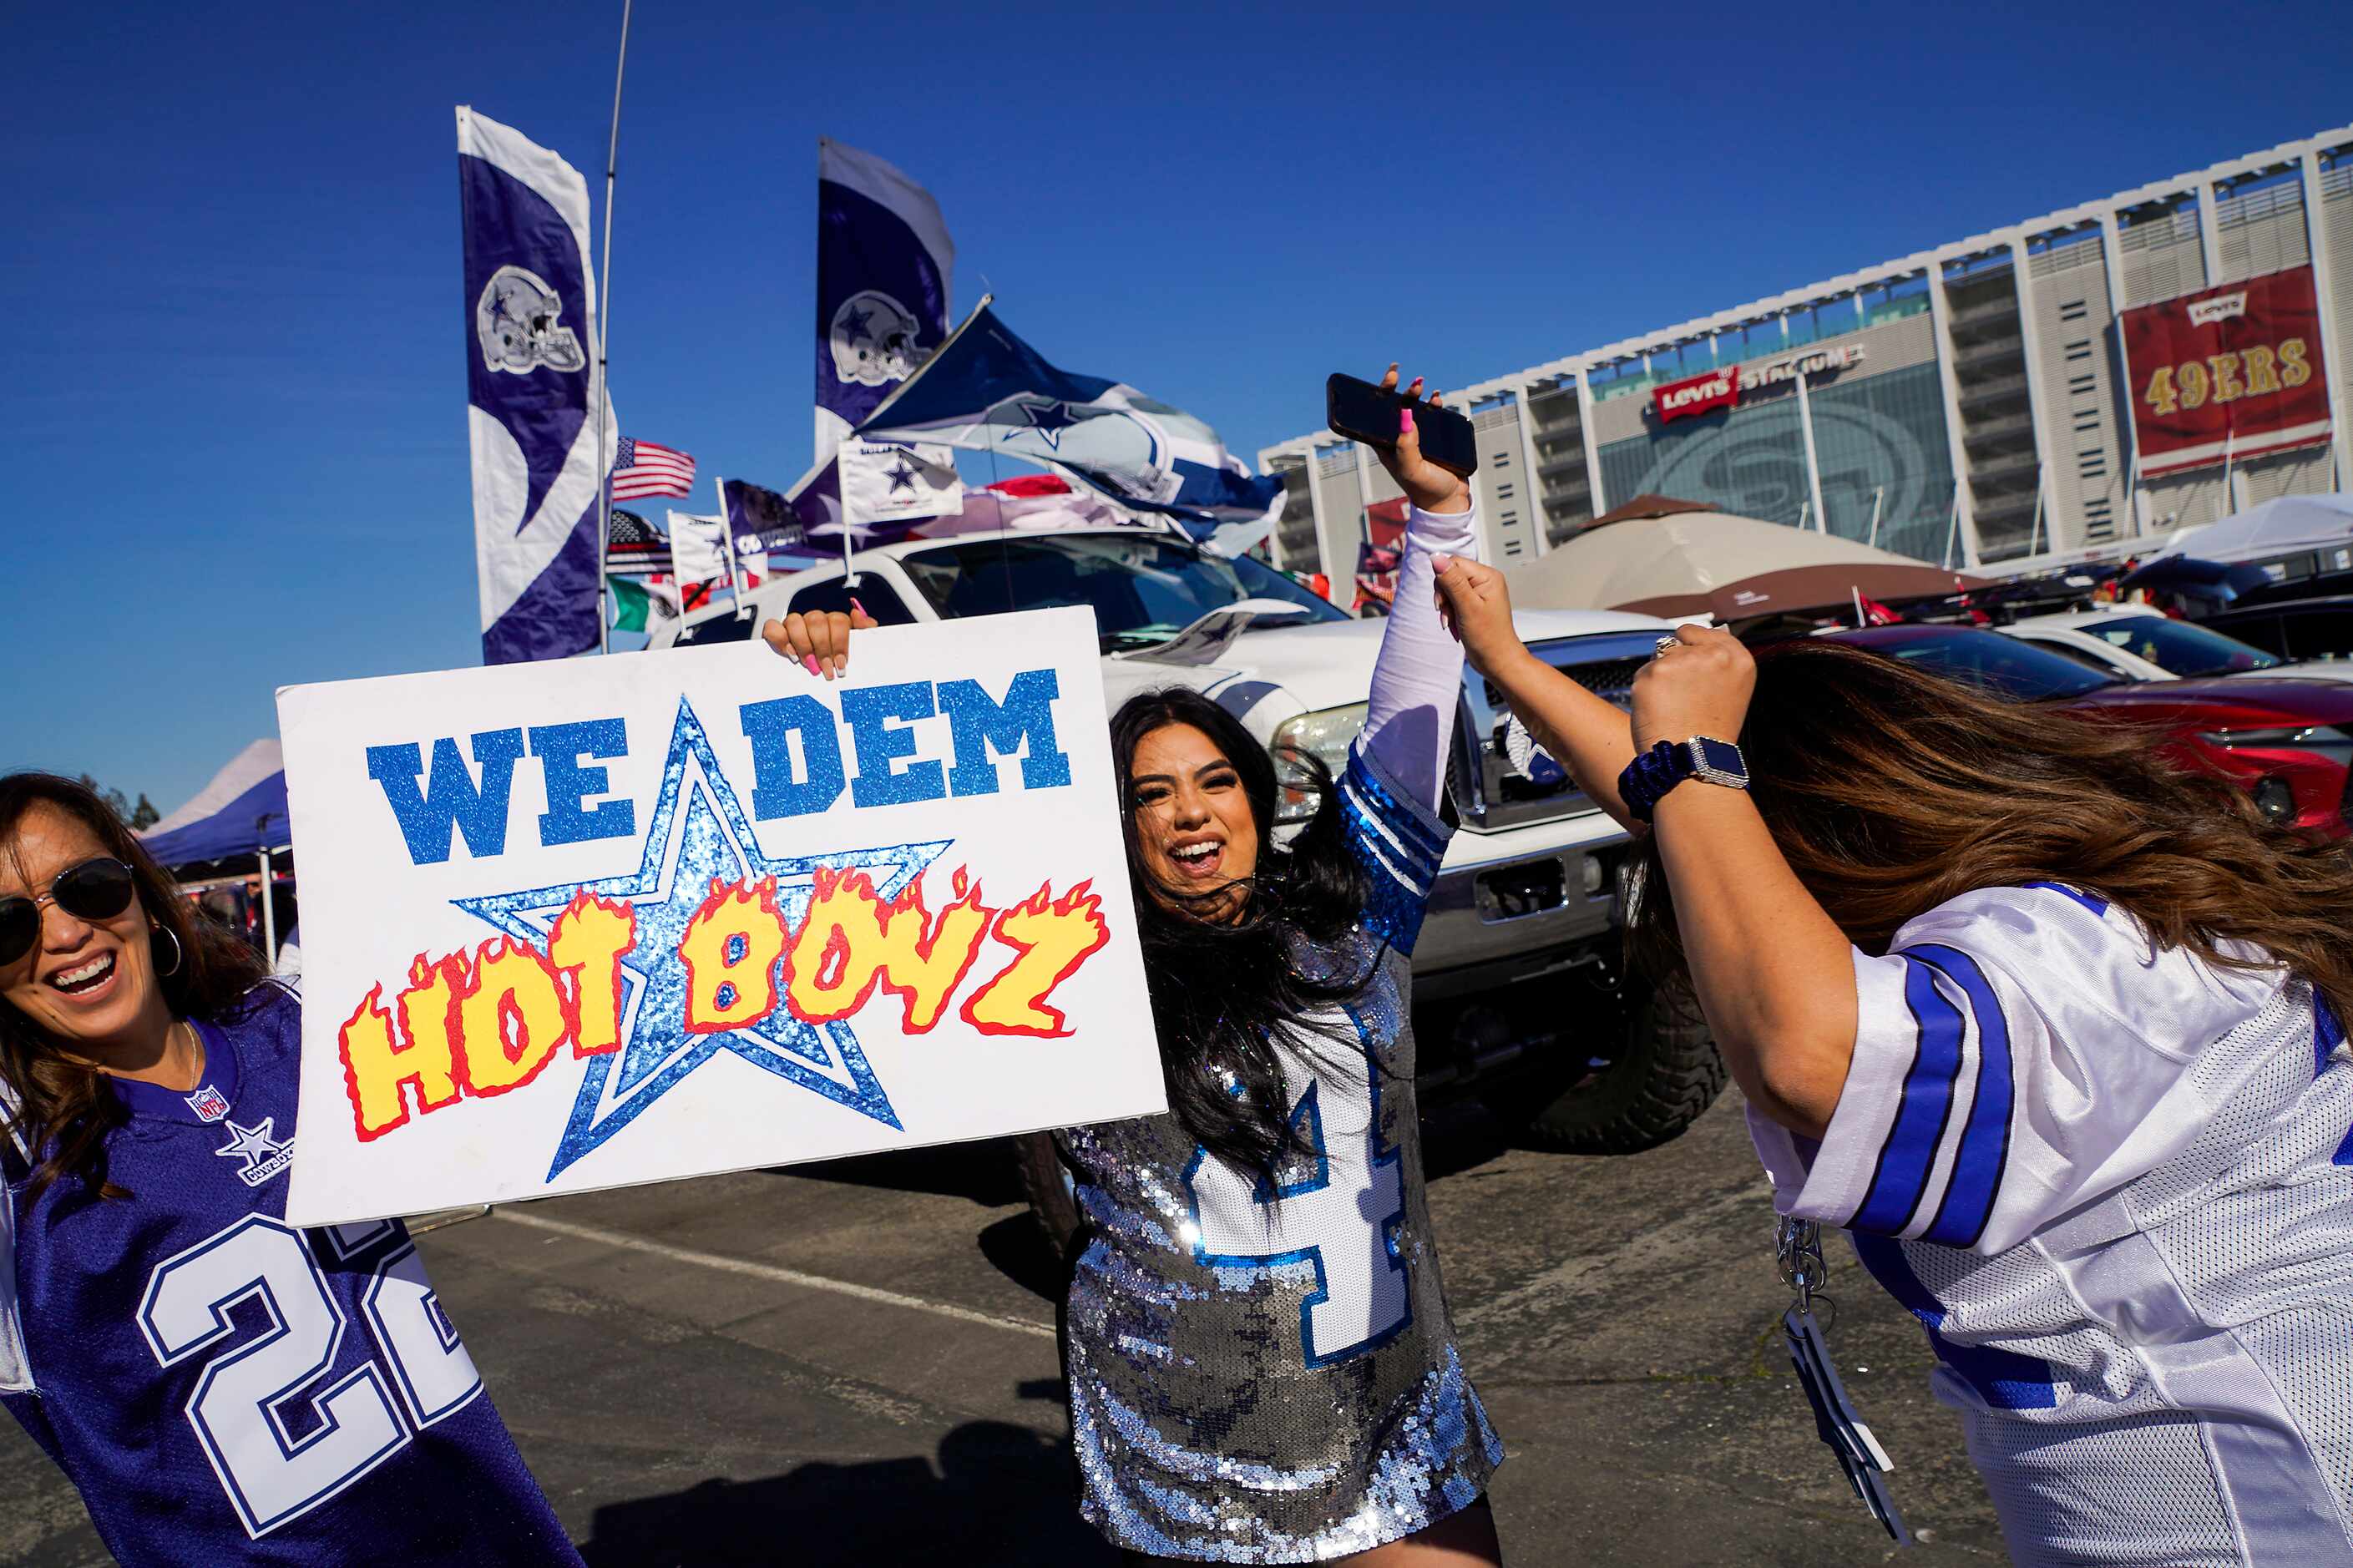 Dallas Cowboys fans Kaylee Chavez (center), Melody Chavez (right) and Amy Dunn cheer in the...